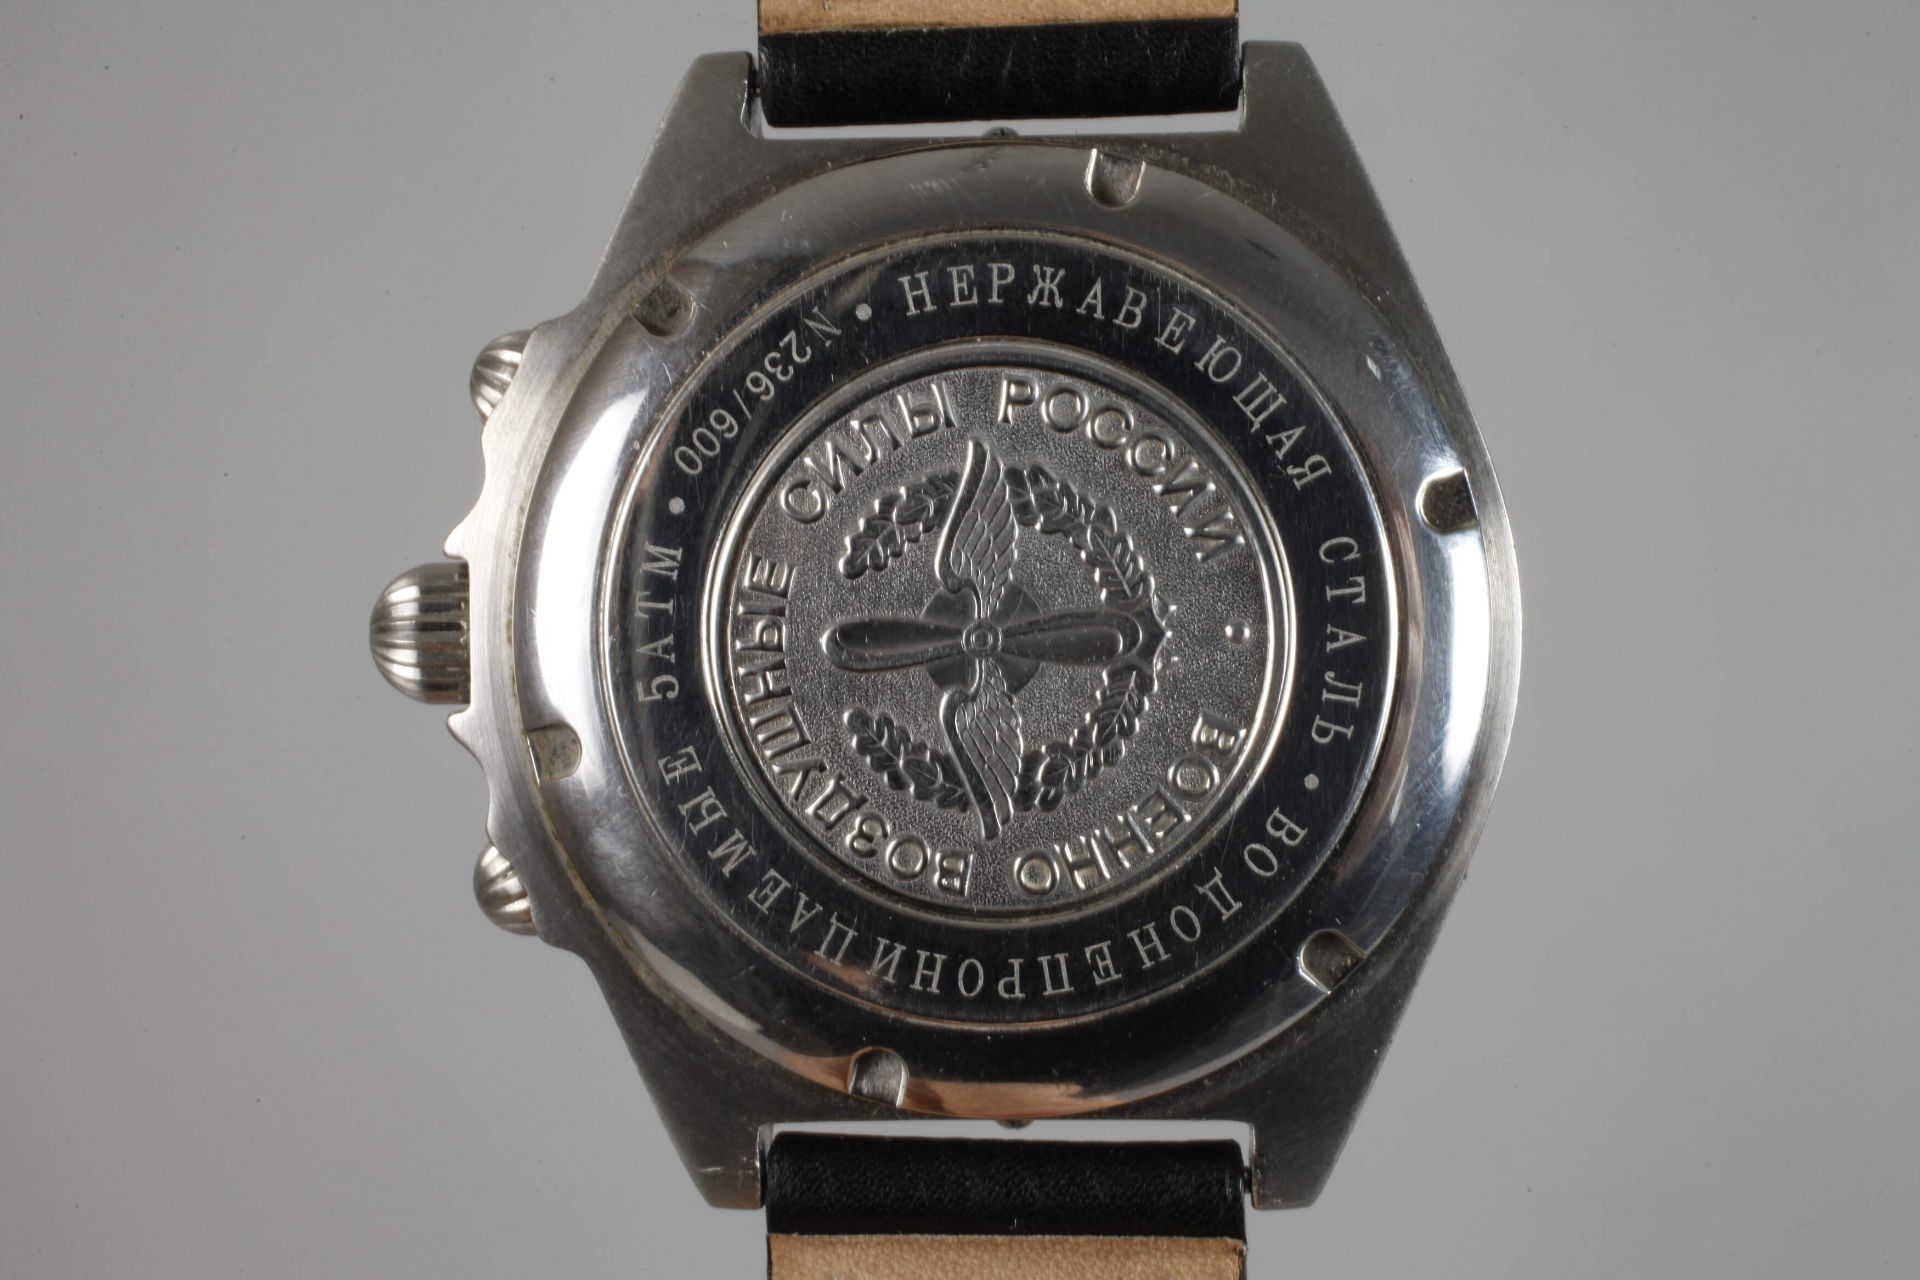 Chronograph Polet - Image 3 of 4